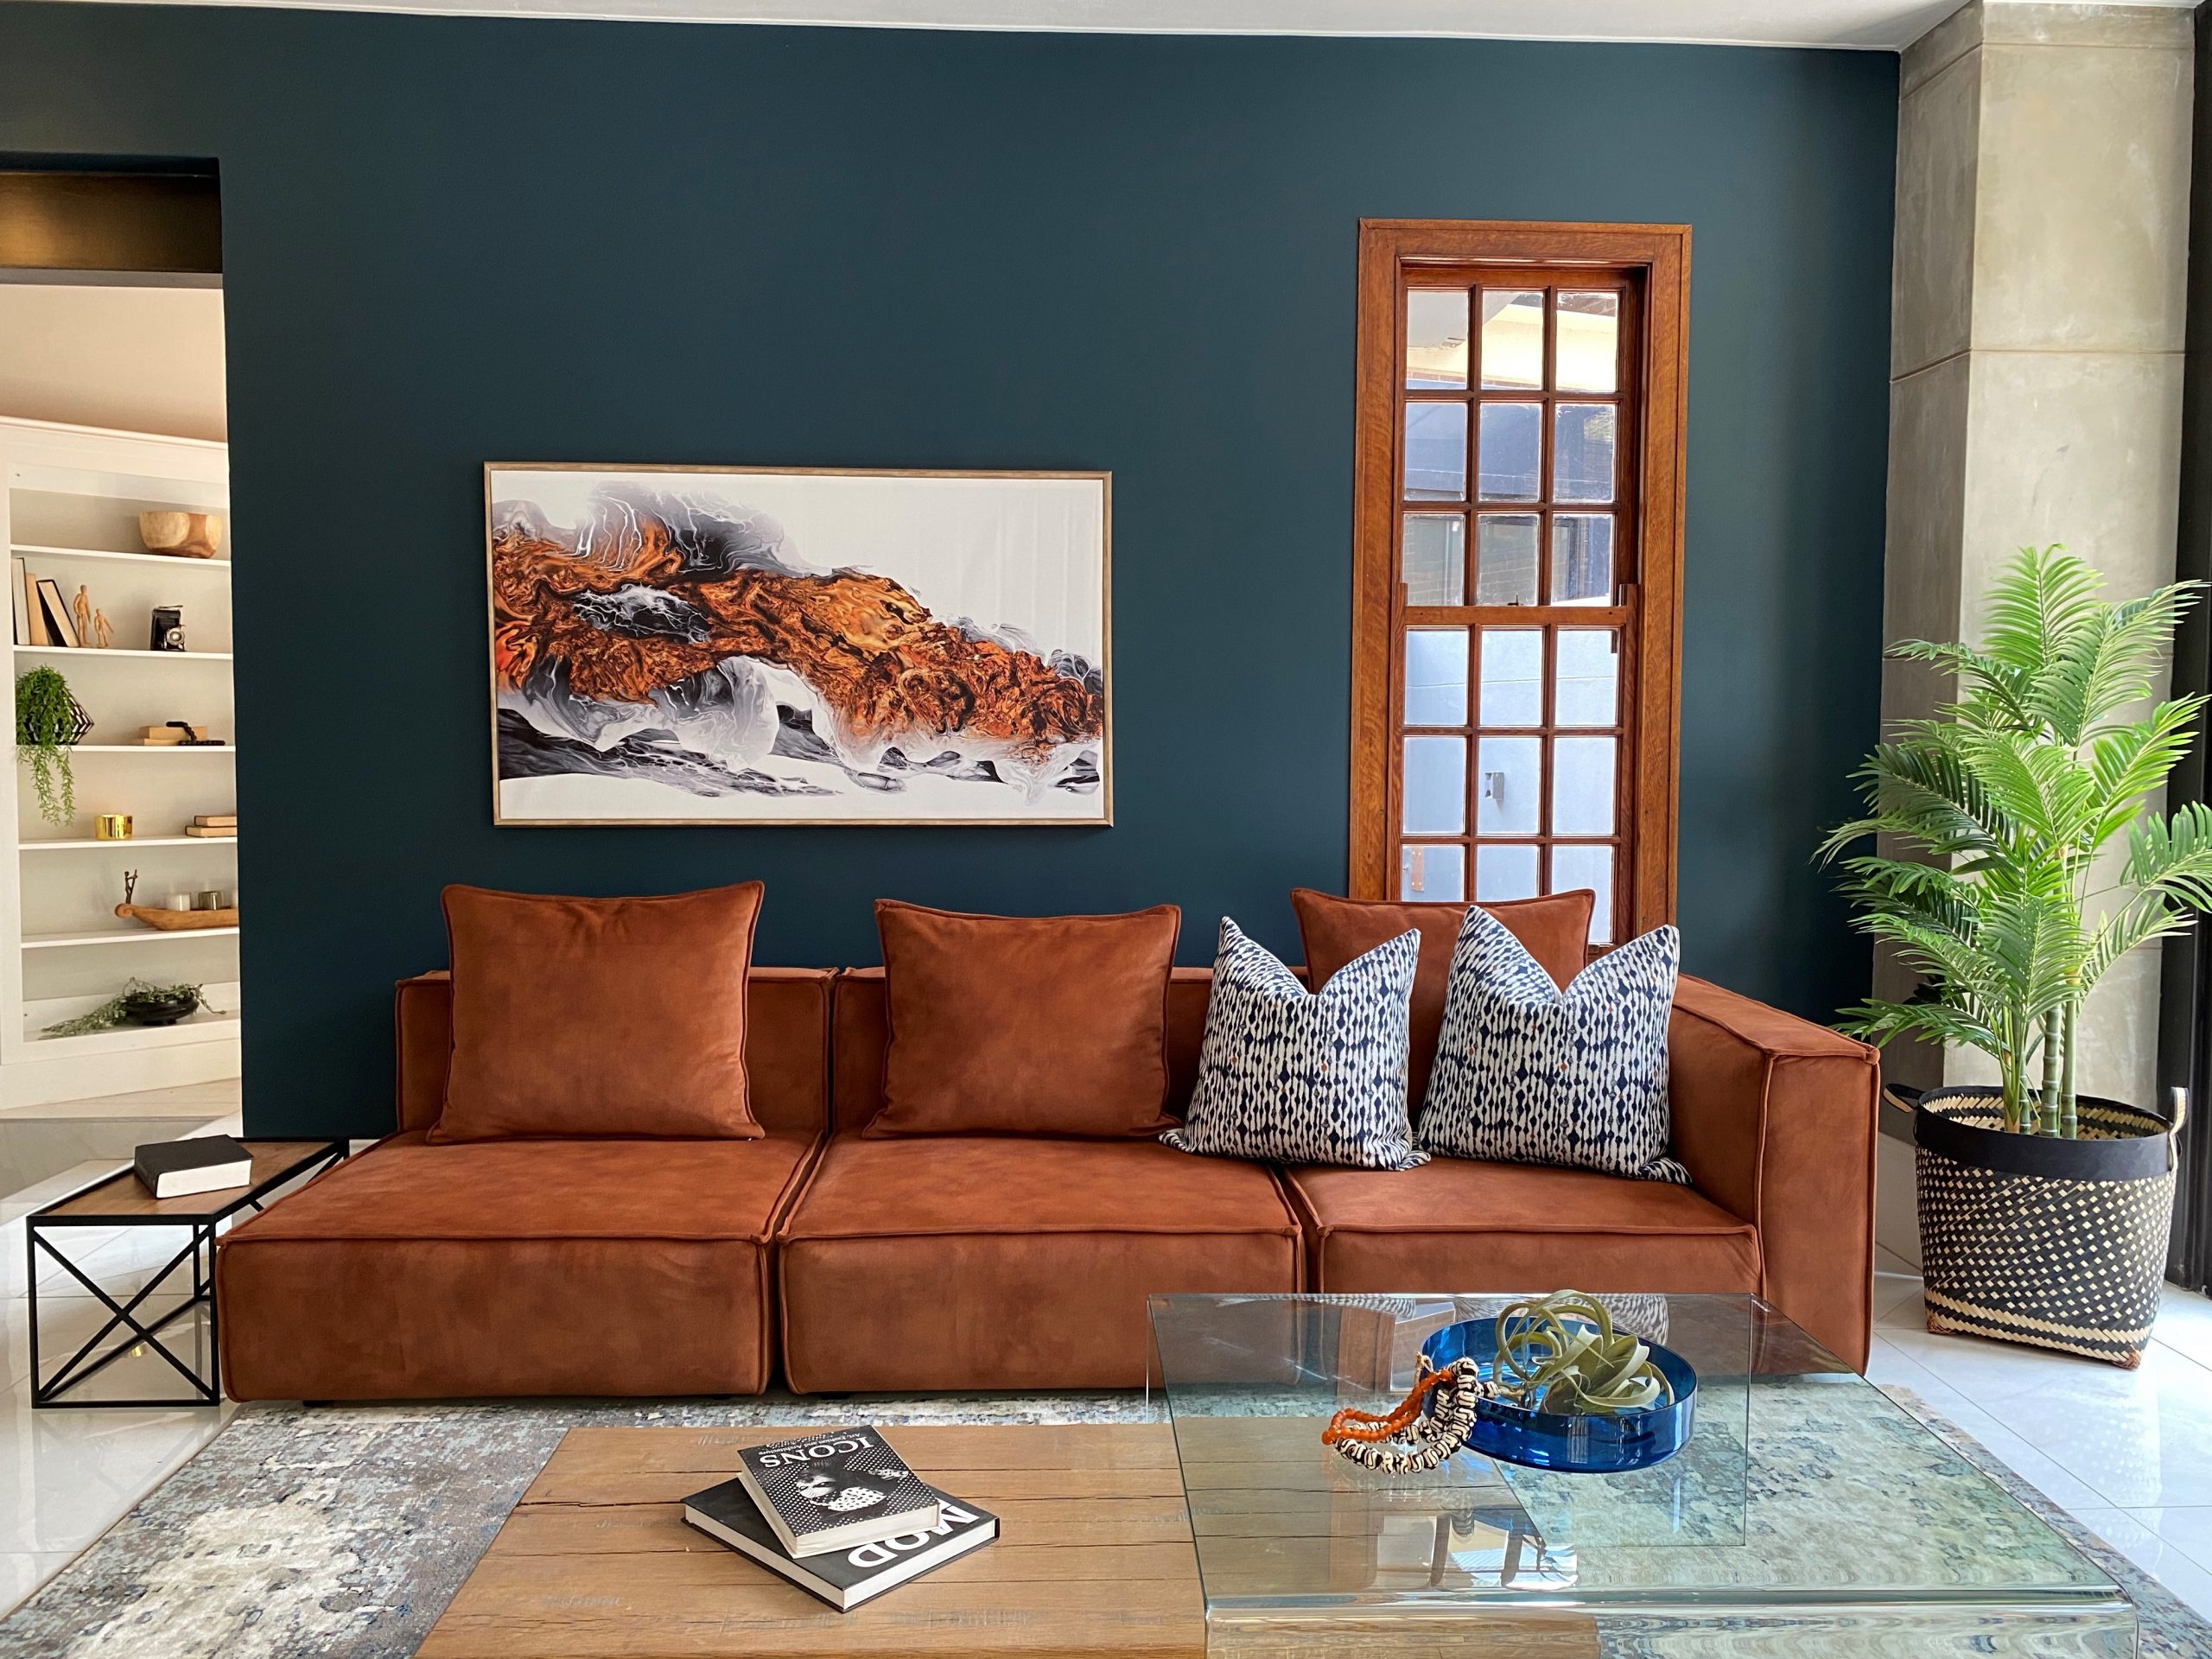 brown tan leather sofa couch with coffee table and wall art